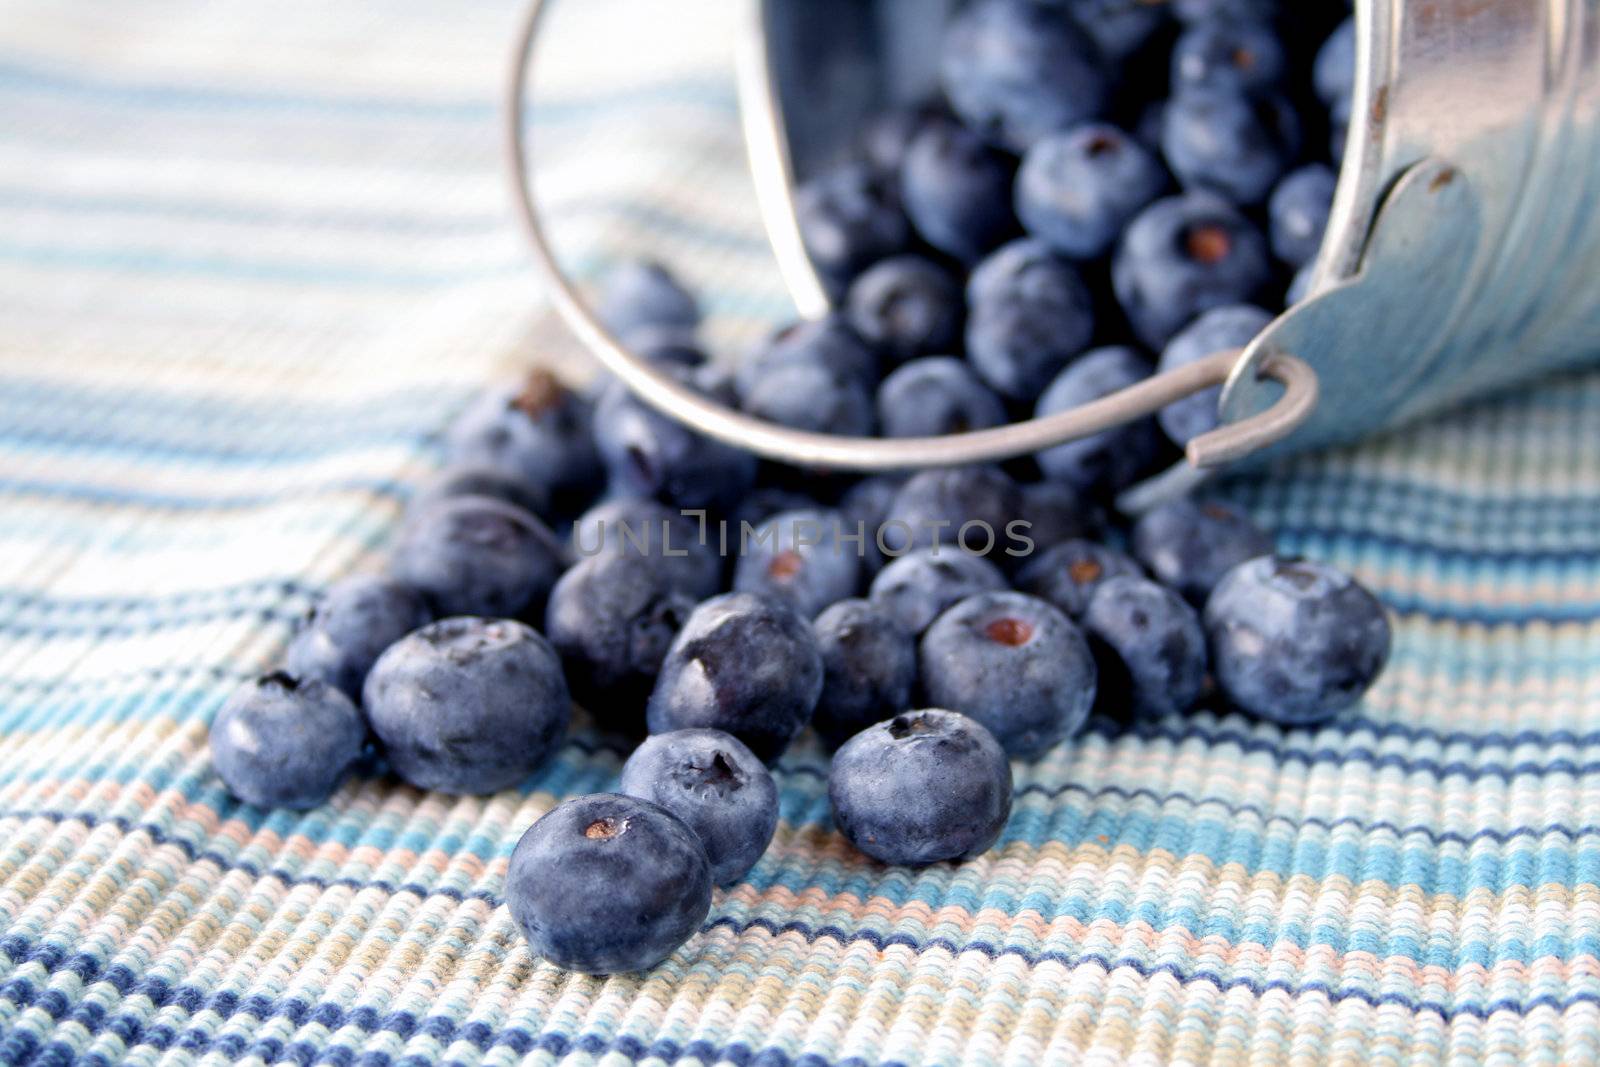 Blueberries by thephotoguy